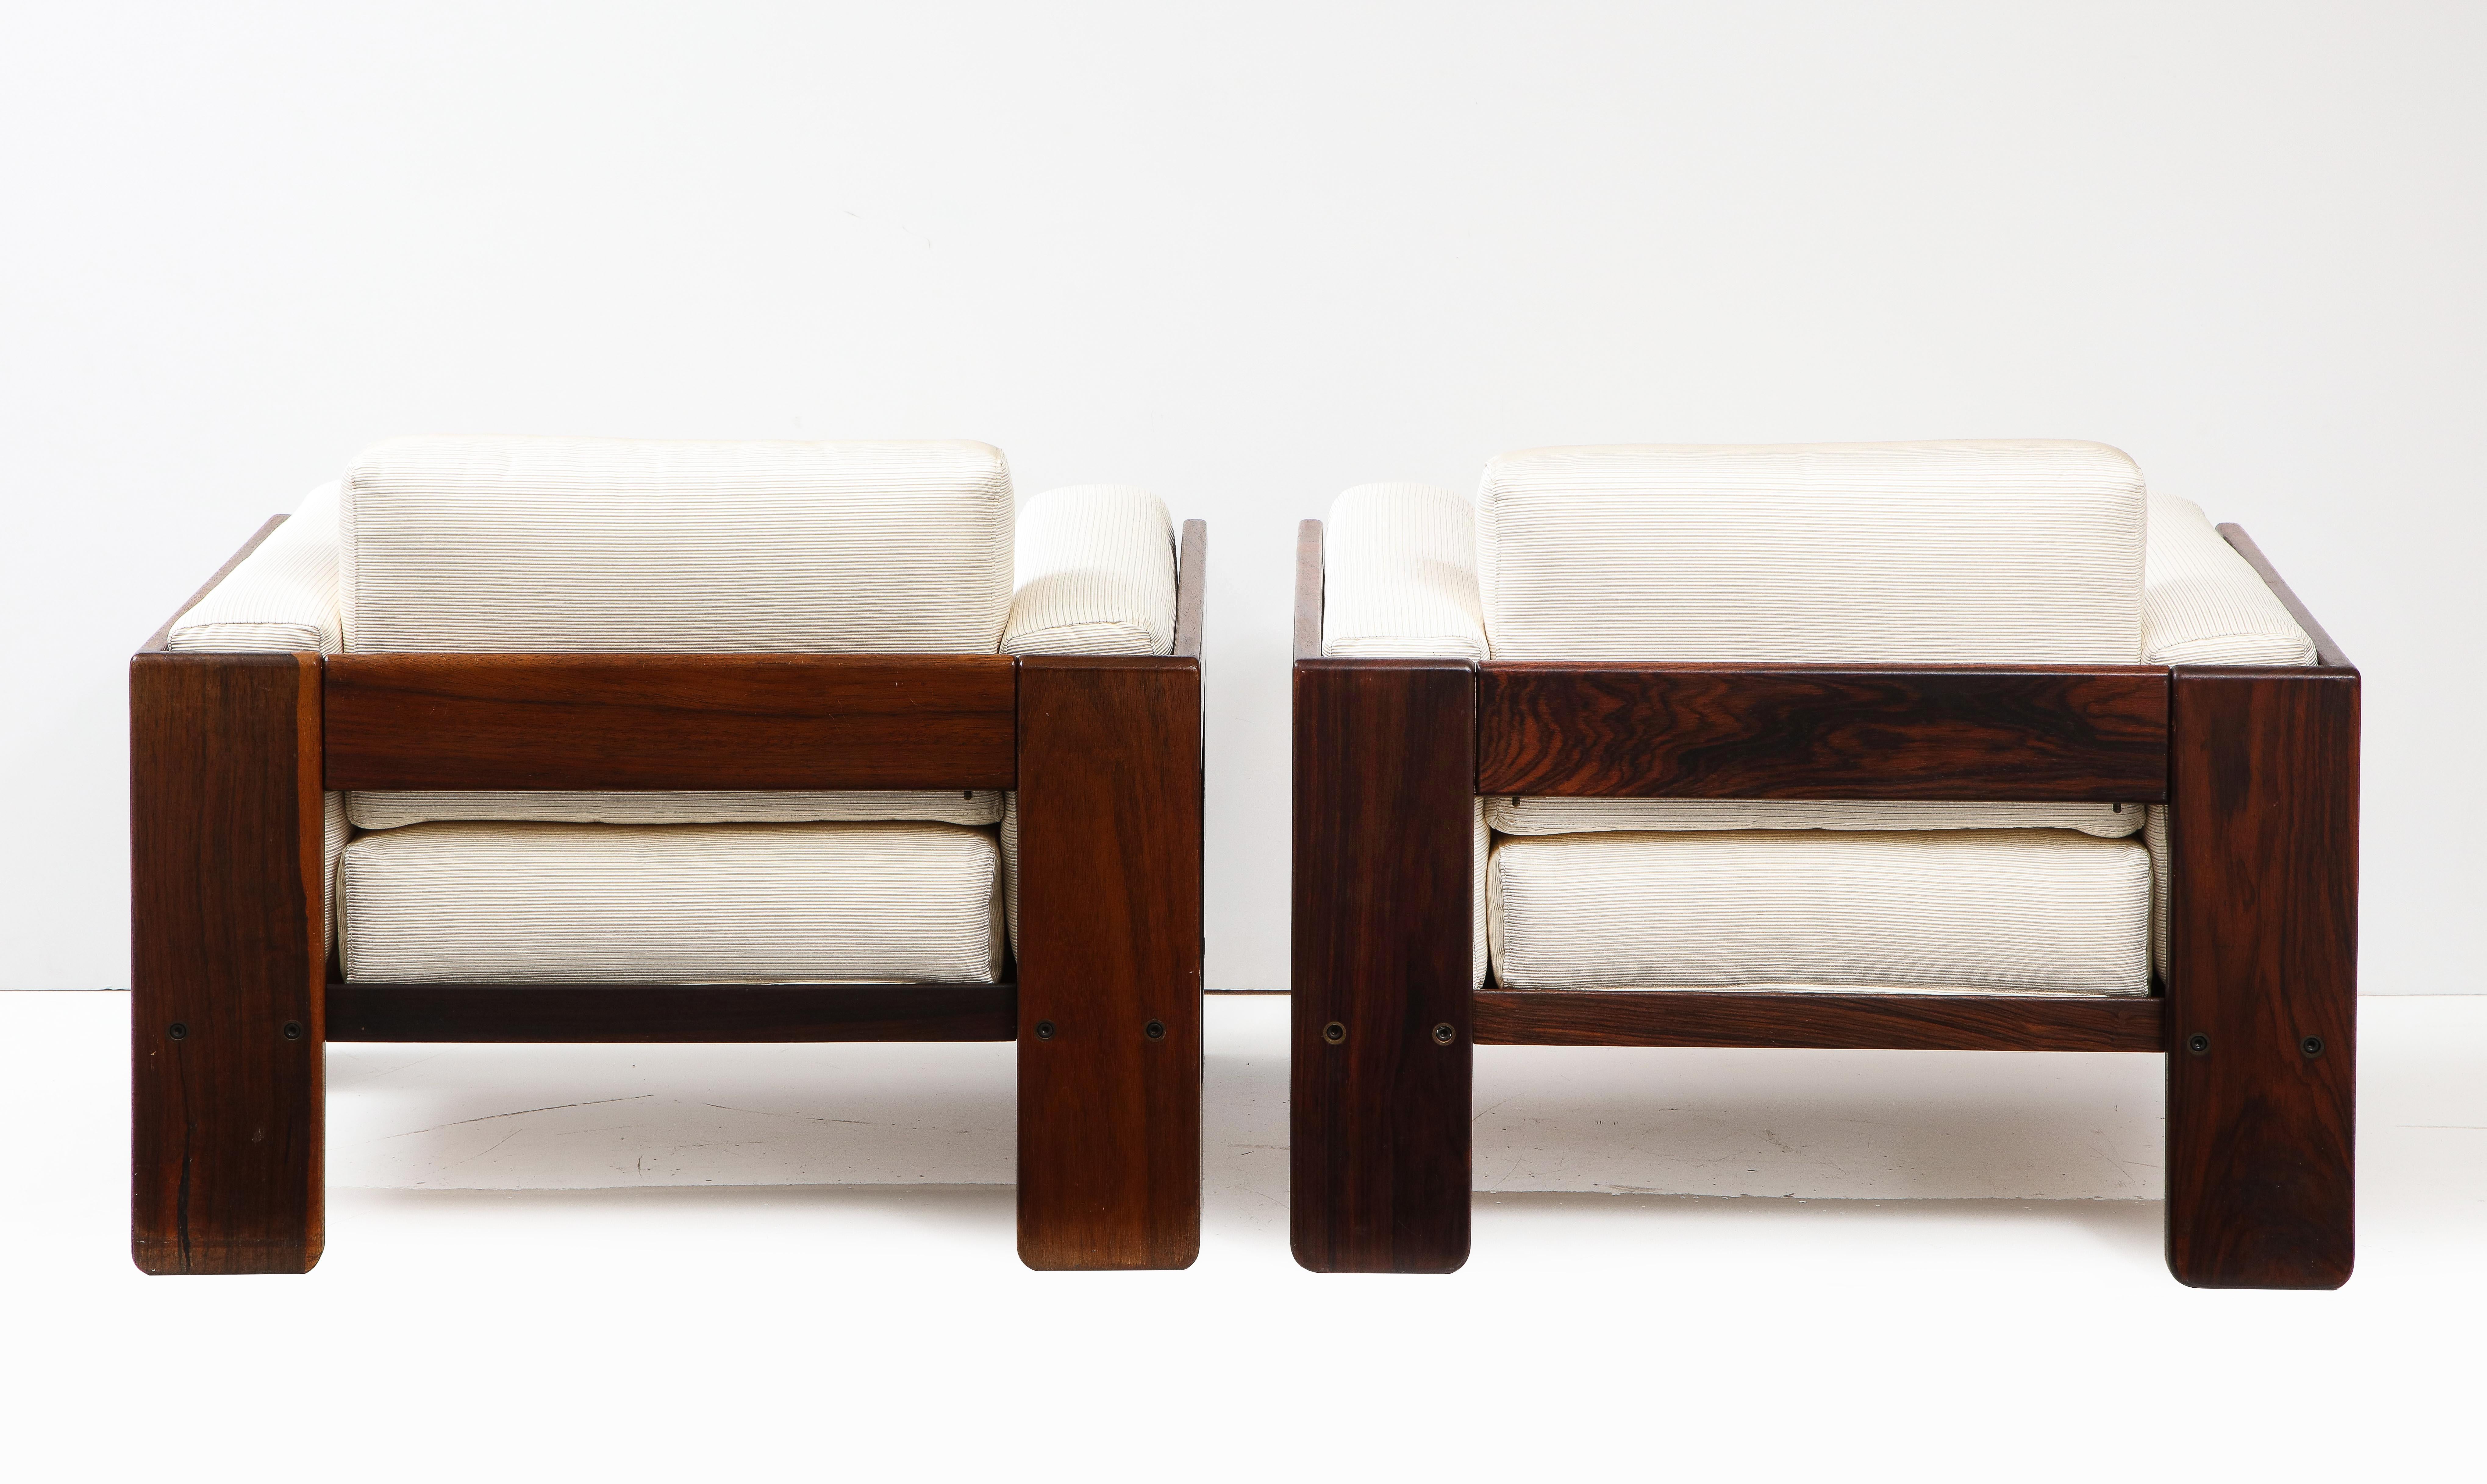 Rosewood Afra & Tobia Scarpa Bastiano Pair of Lounge Chairs, by Gavina, Italy, 1960